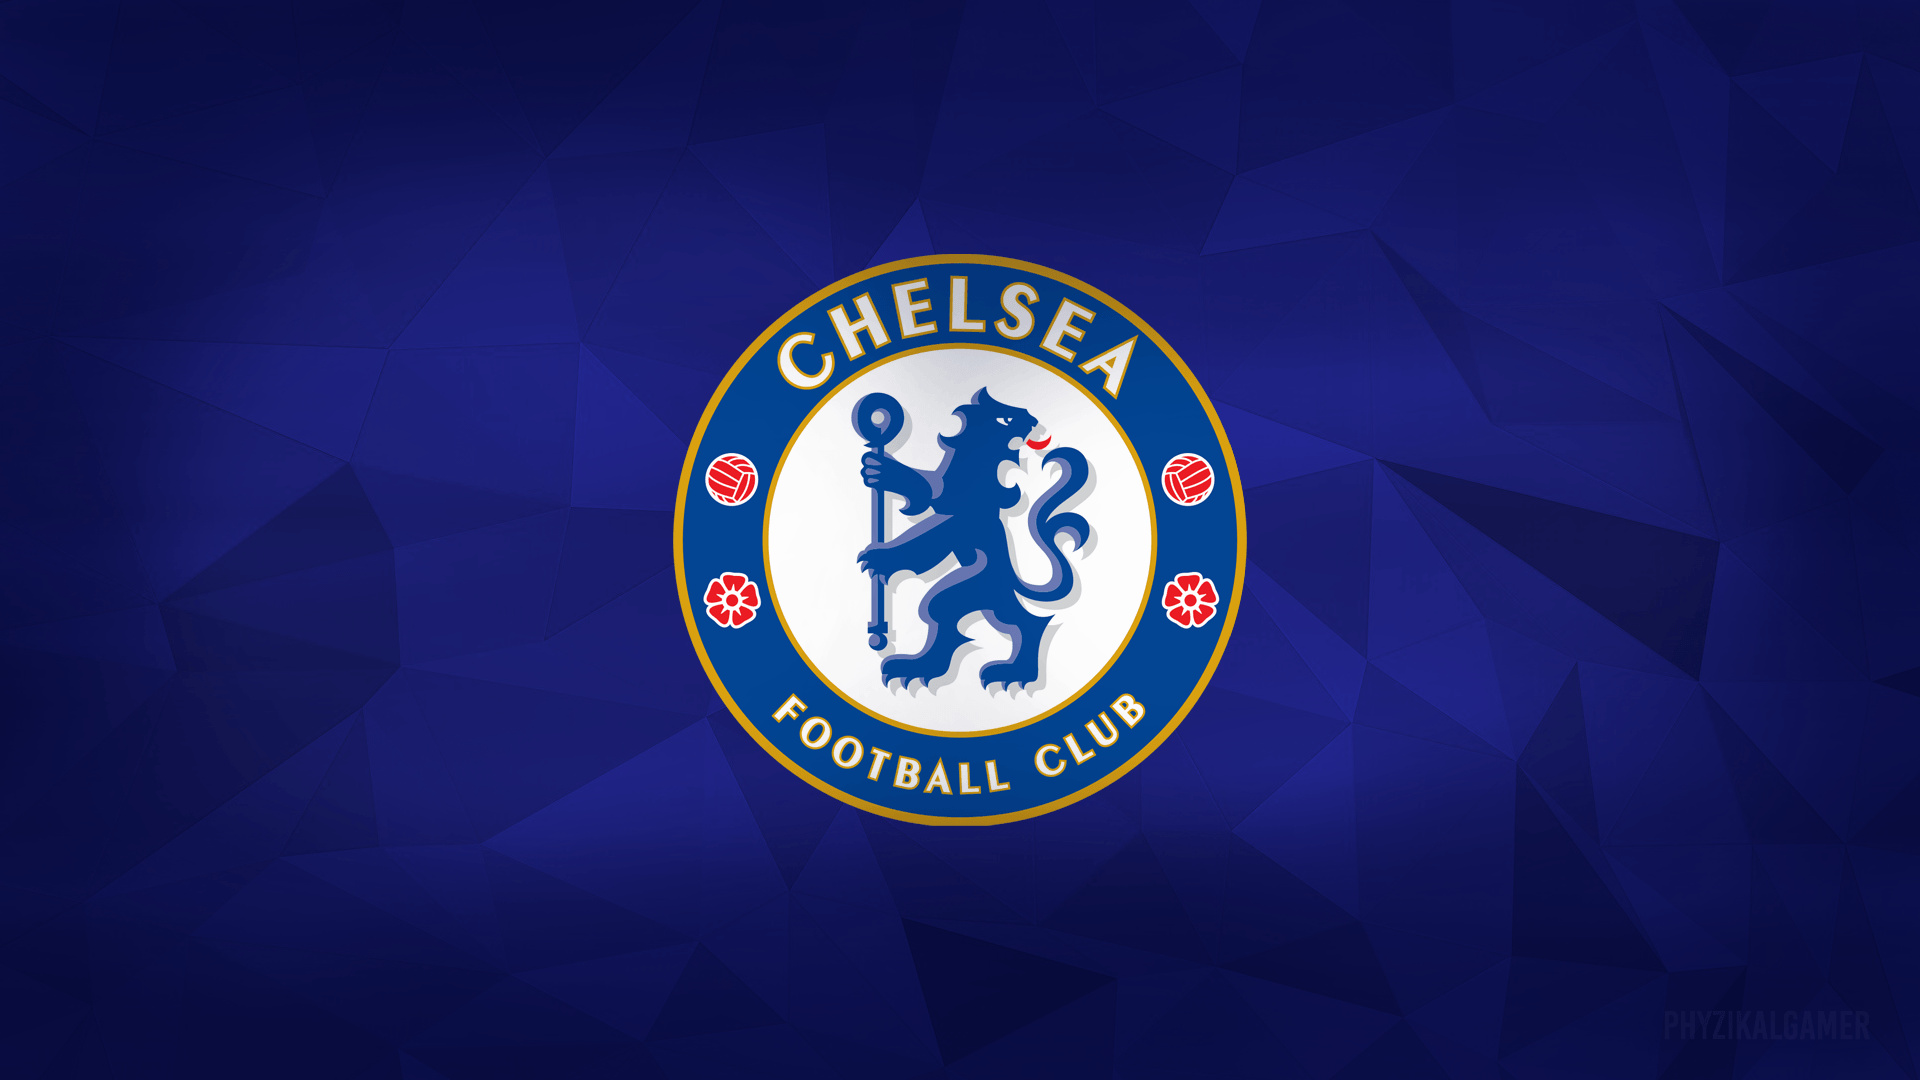 Chelsea: Founded in The Rising Sun pub on Fulham Road, March 10th 1905. 1920x1080 Full HD Background.